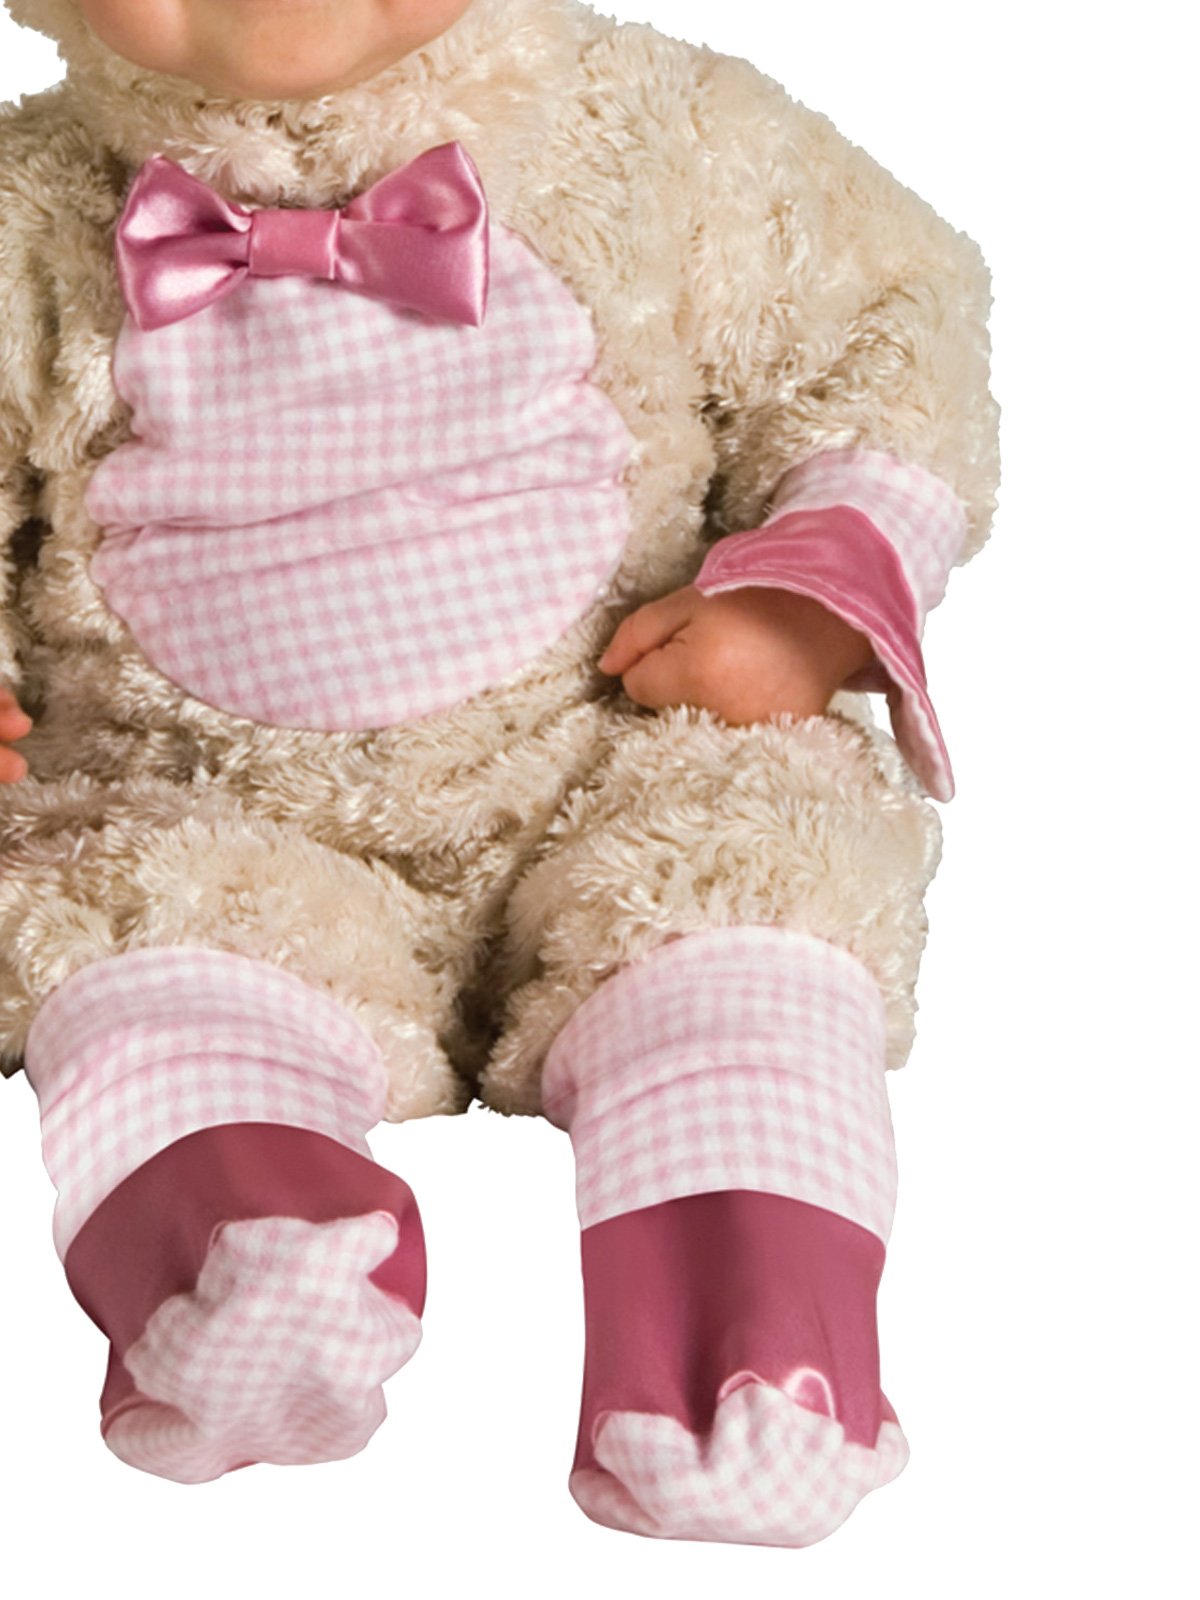 Lucky Lil Lamb Costume for Babies and Toddlers Rubies Kids BabyToddler